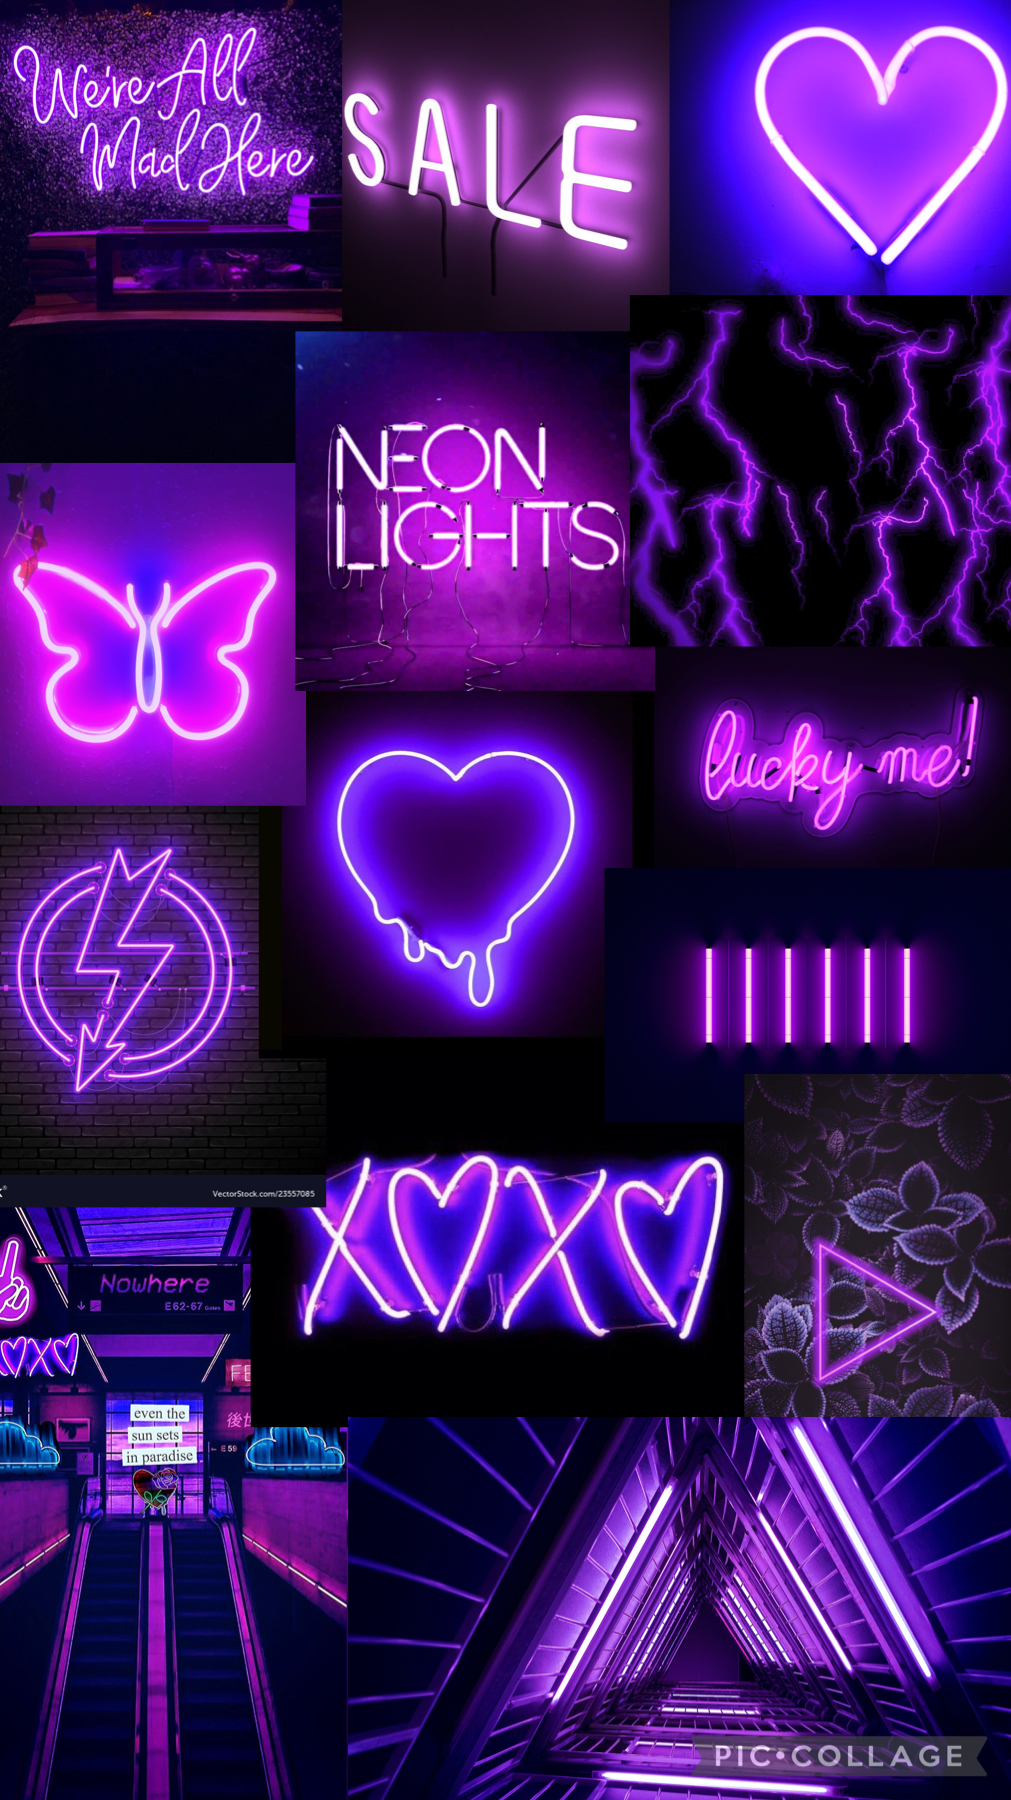 🤦‍♀️neon purple aesthetic🤦‍♀️
  🤦‍♀️sorry been a long week🤦‍♀️
     🤦‍♀️I won’t be on a whole lot🤦‍♀️
        🤦‍♀️going on vacation this week🤦‍♀️
           🤦‍♀️love u guys🤦‍♀️